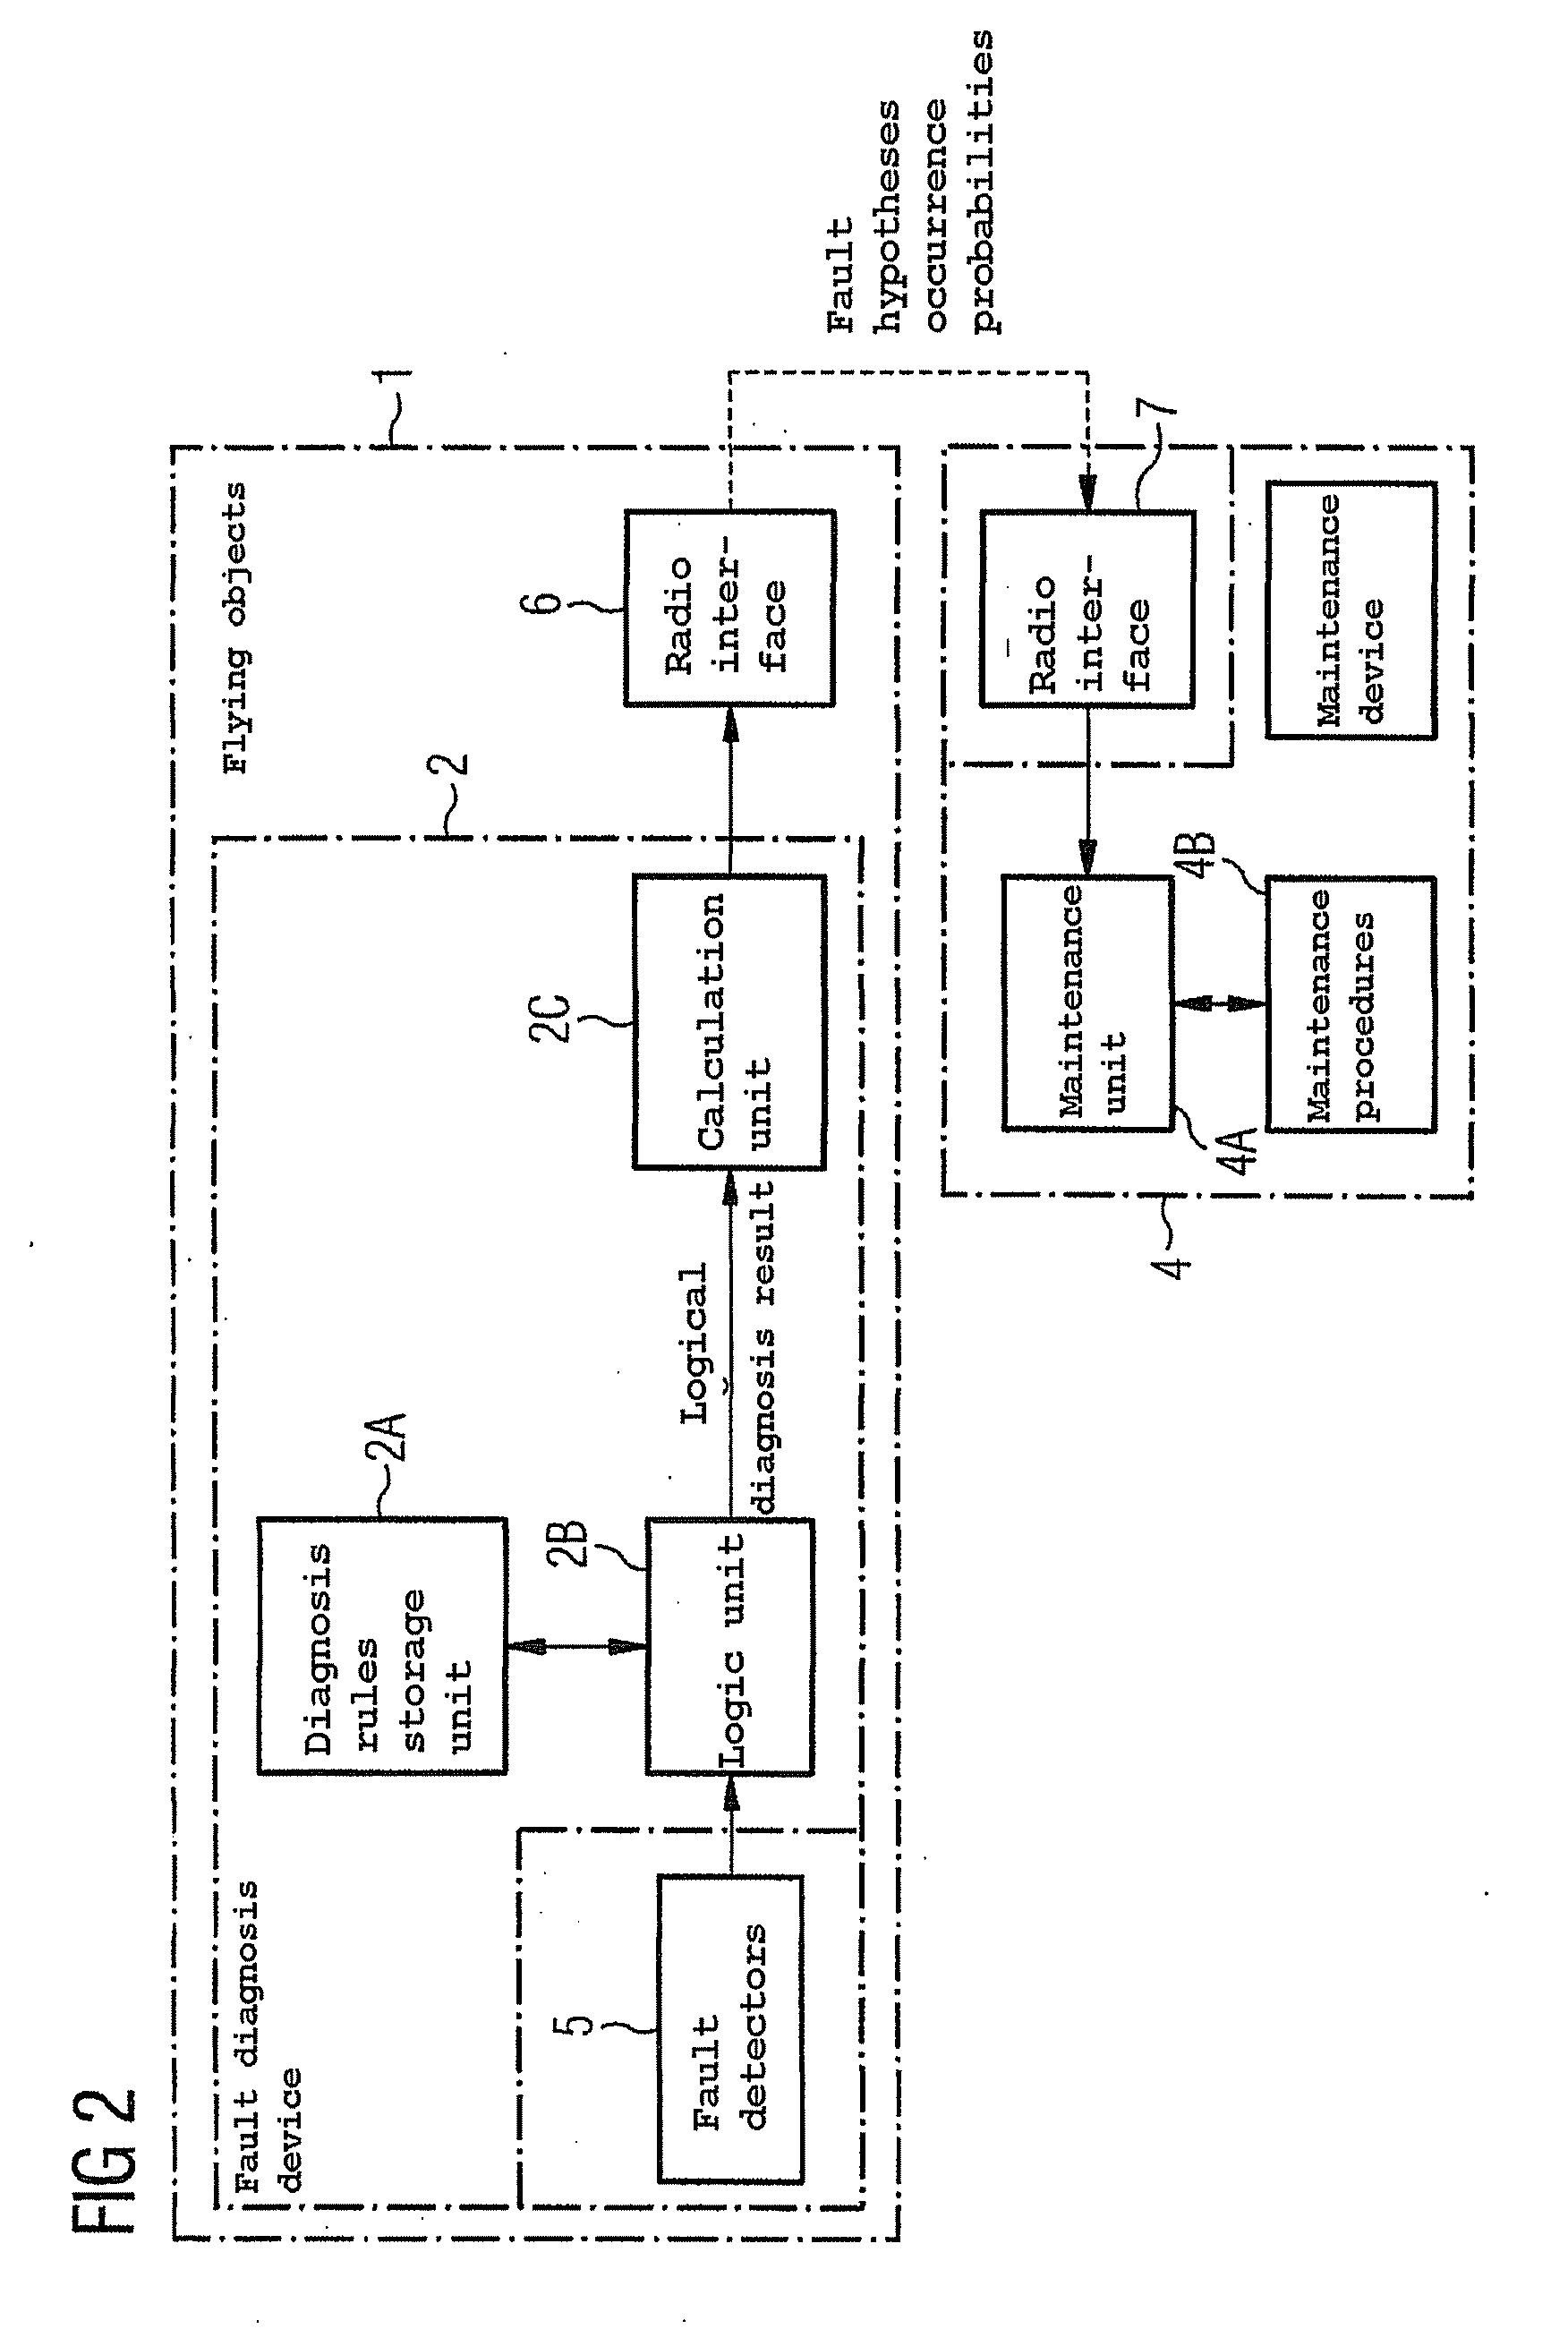 Fault diagnosis device and method for optimizing maintenance measures in technical systems